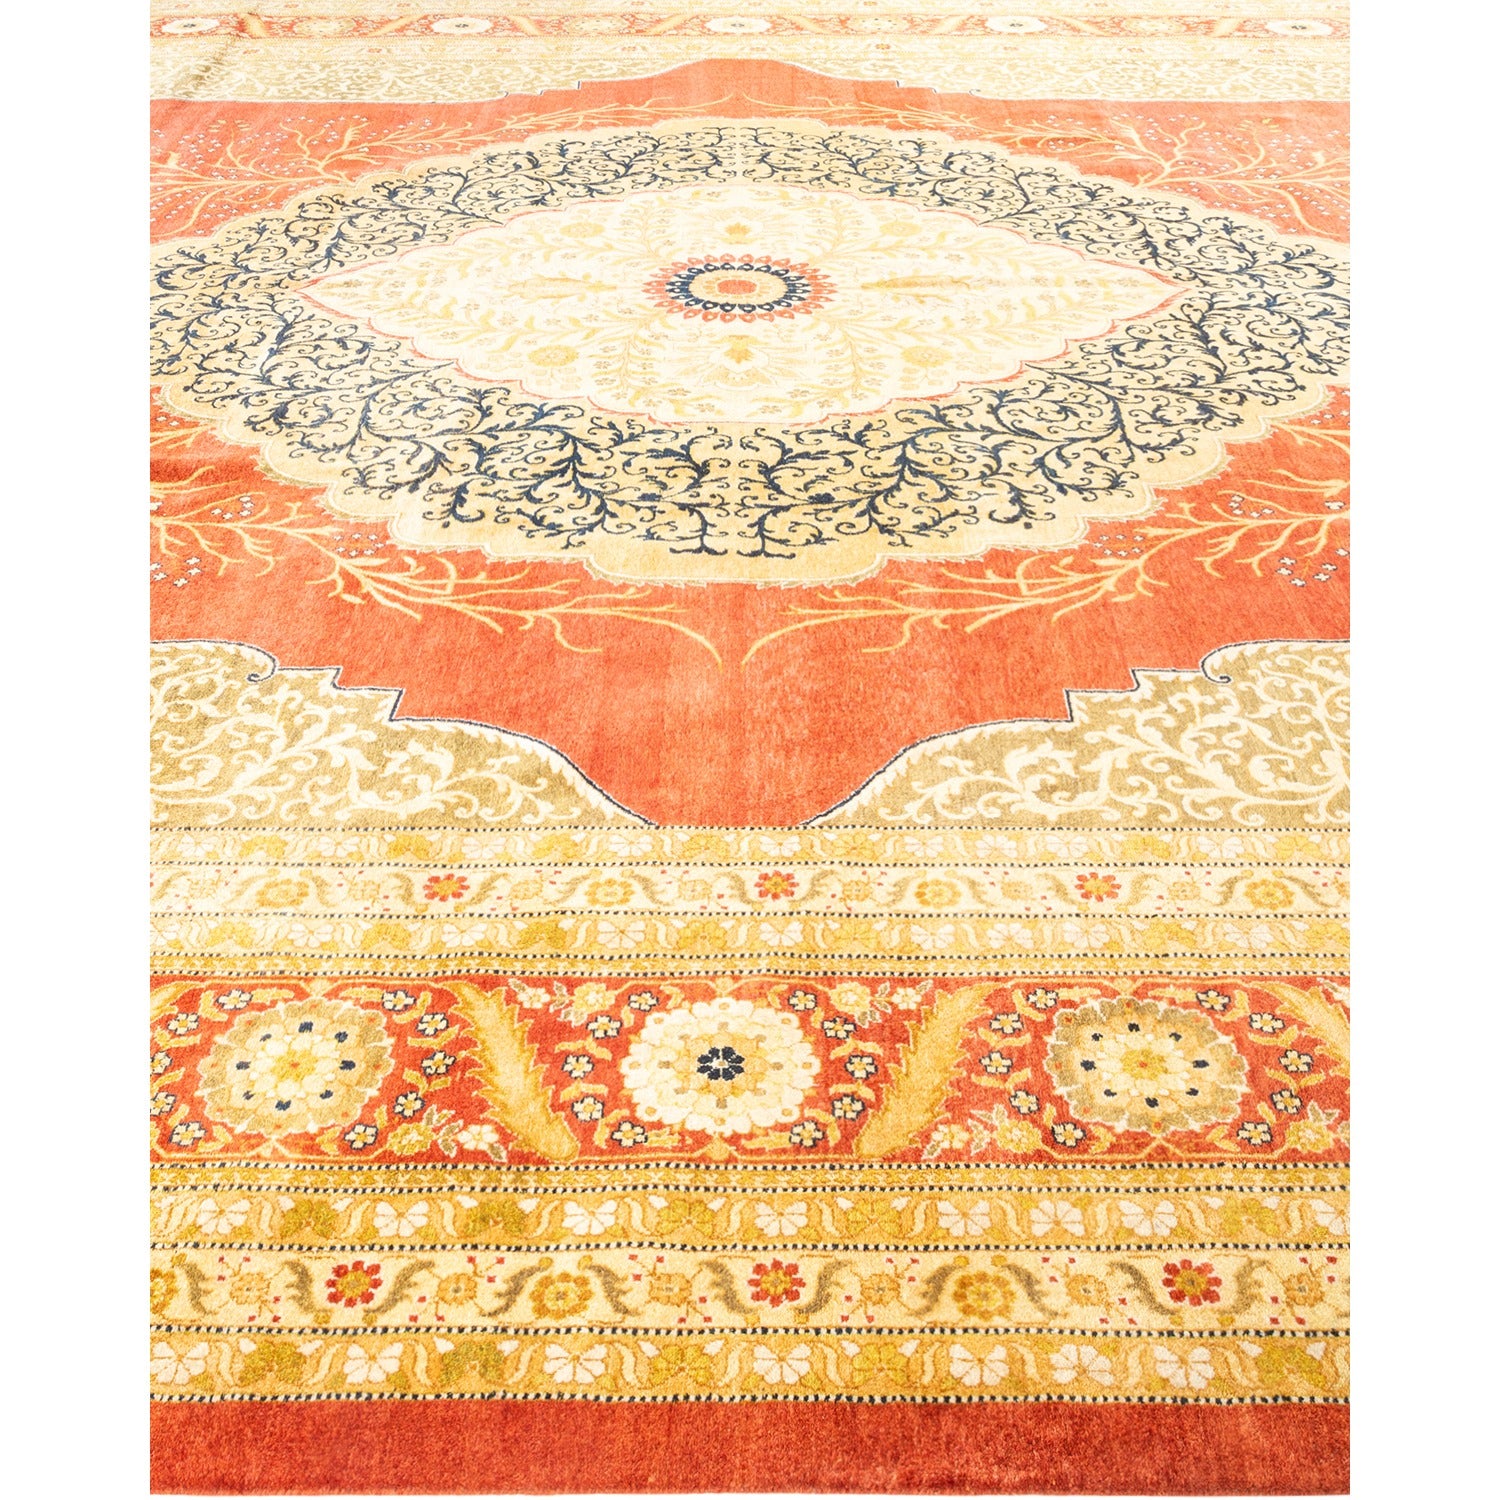 Exquisite hand-woven rug featuring intricate patterns and rich warm colors.